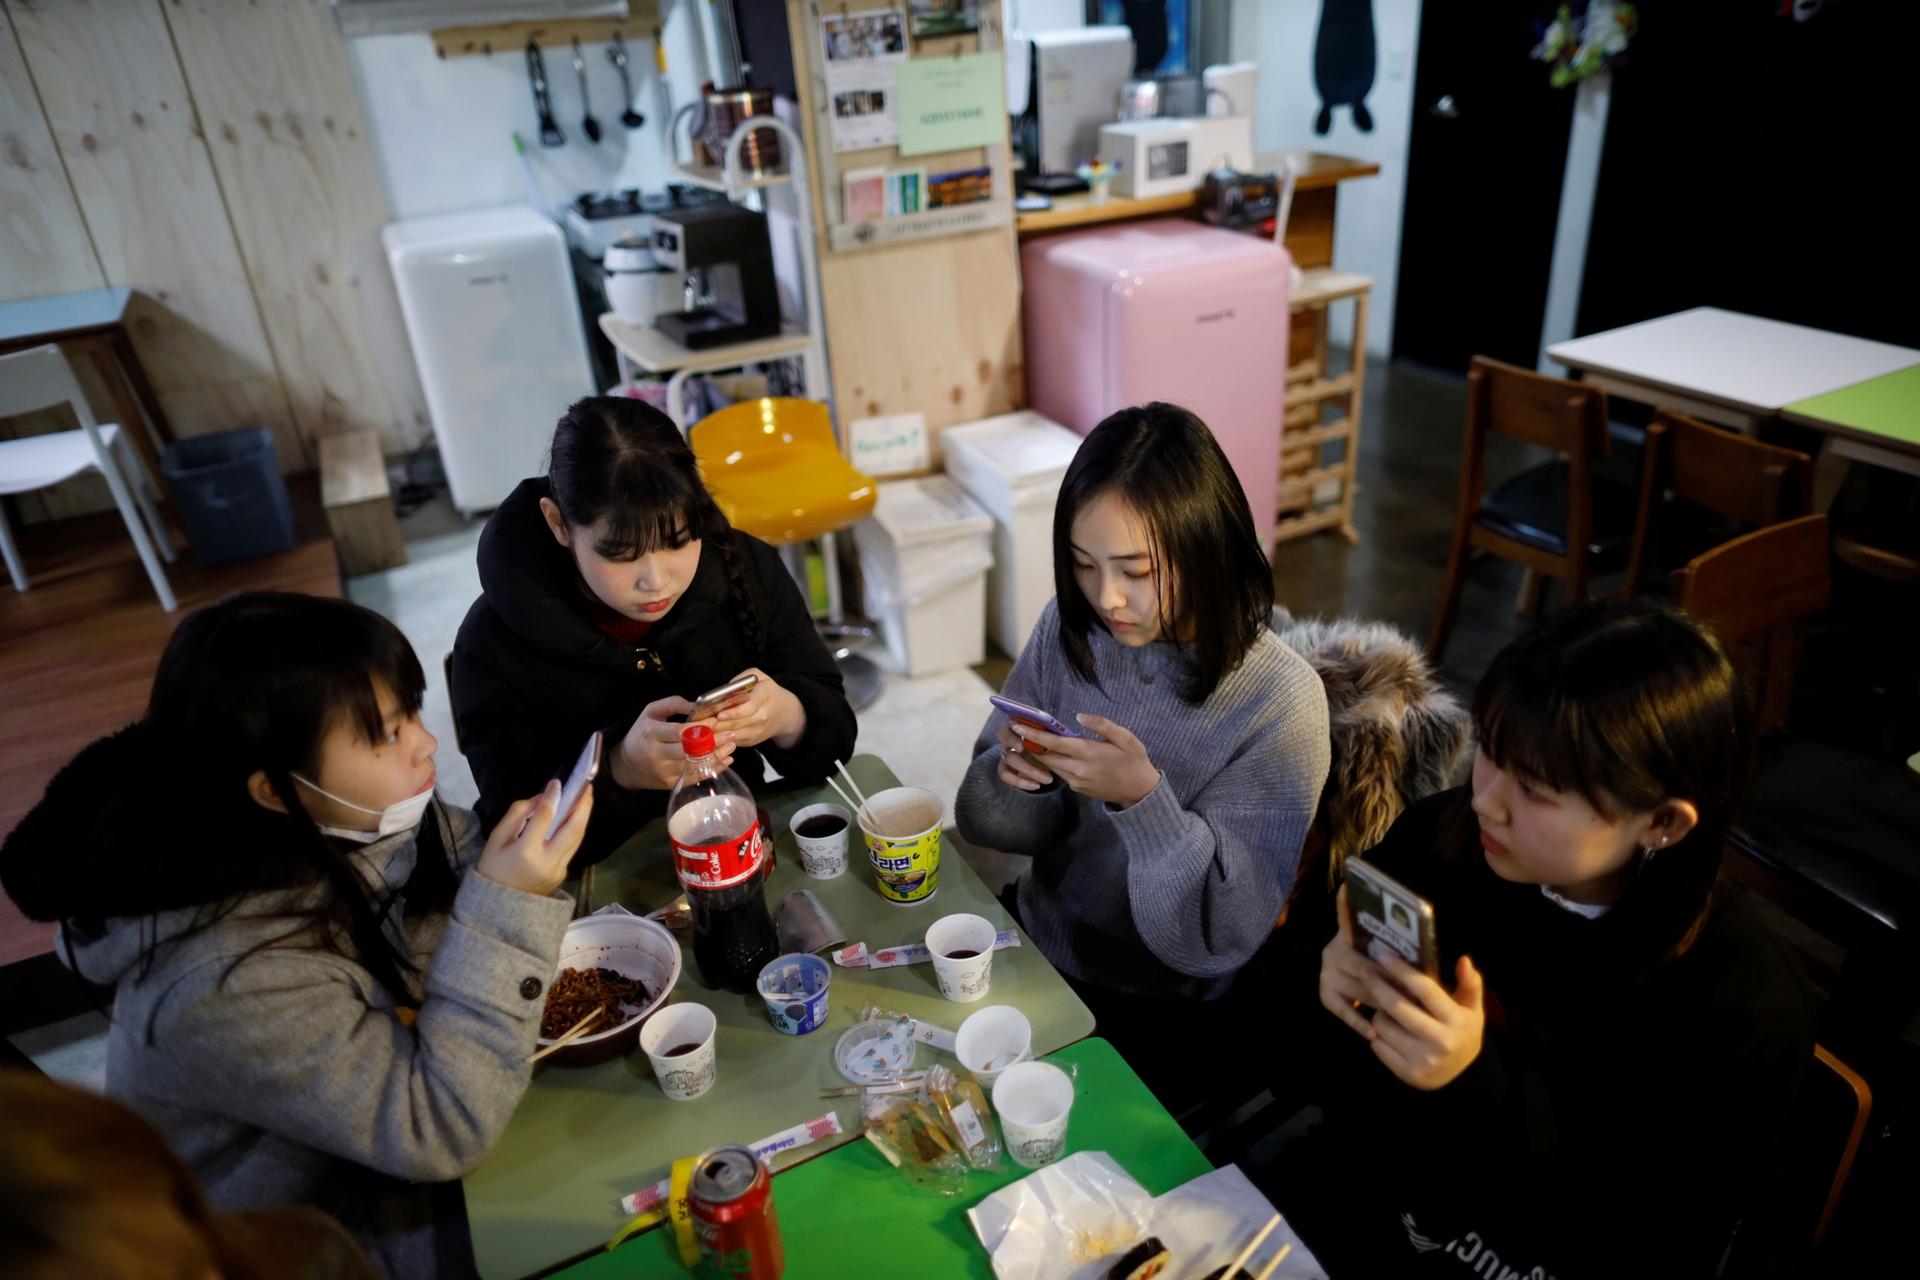 Four young women are shown sitting around two small green tables, all of them with a mobile phone.